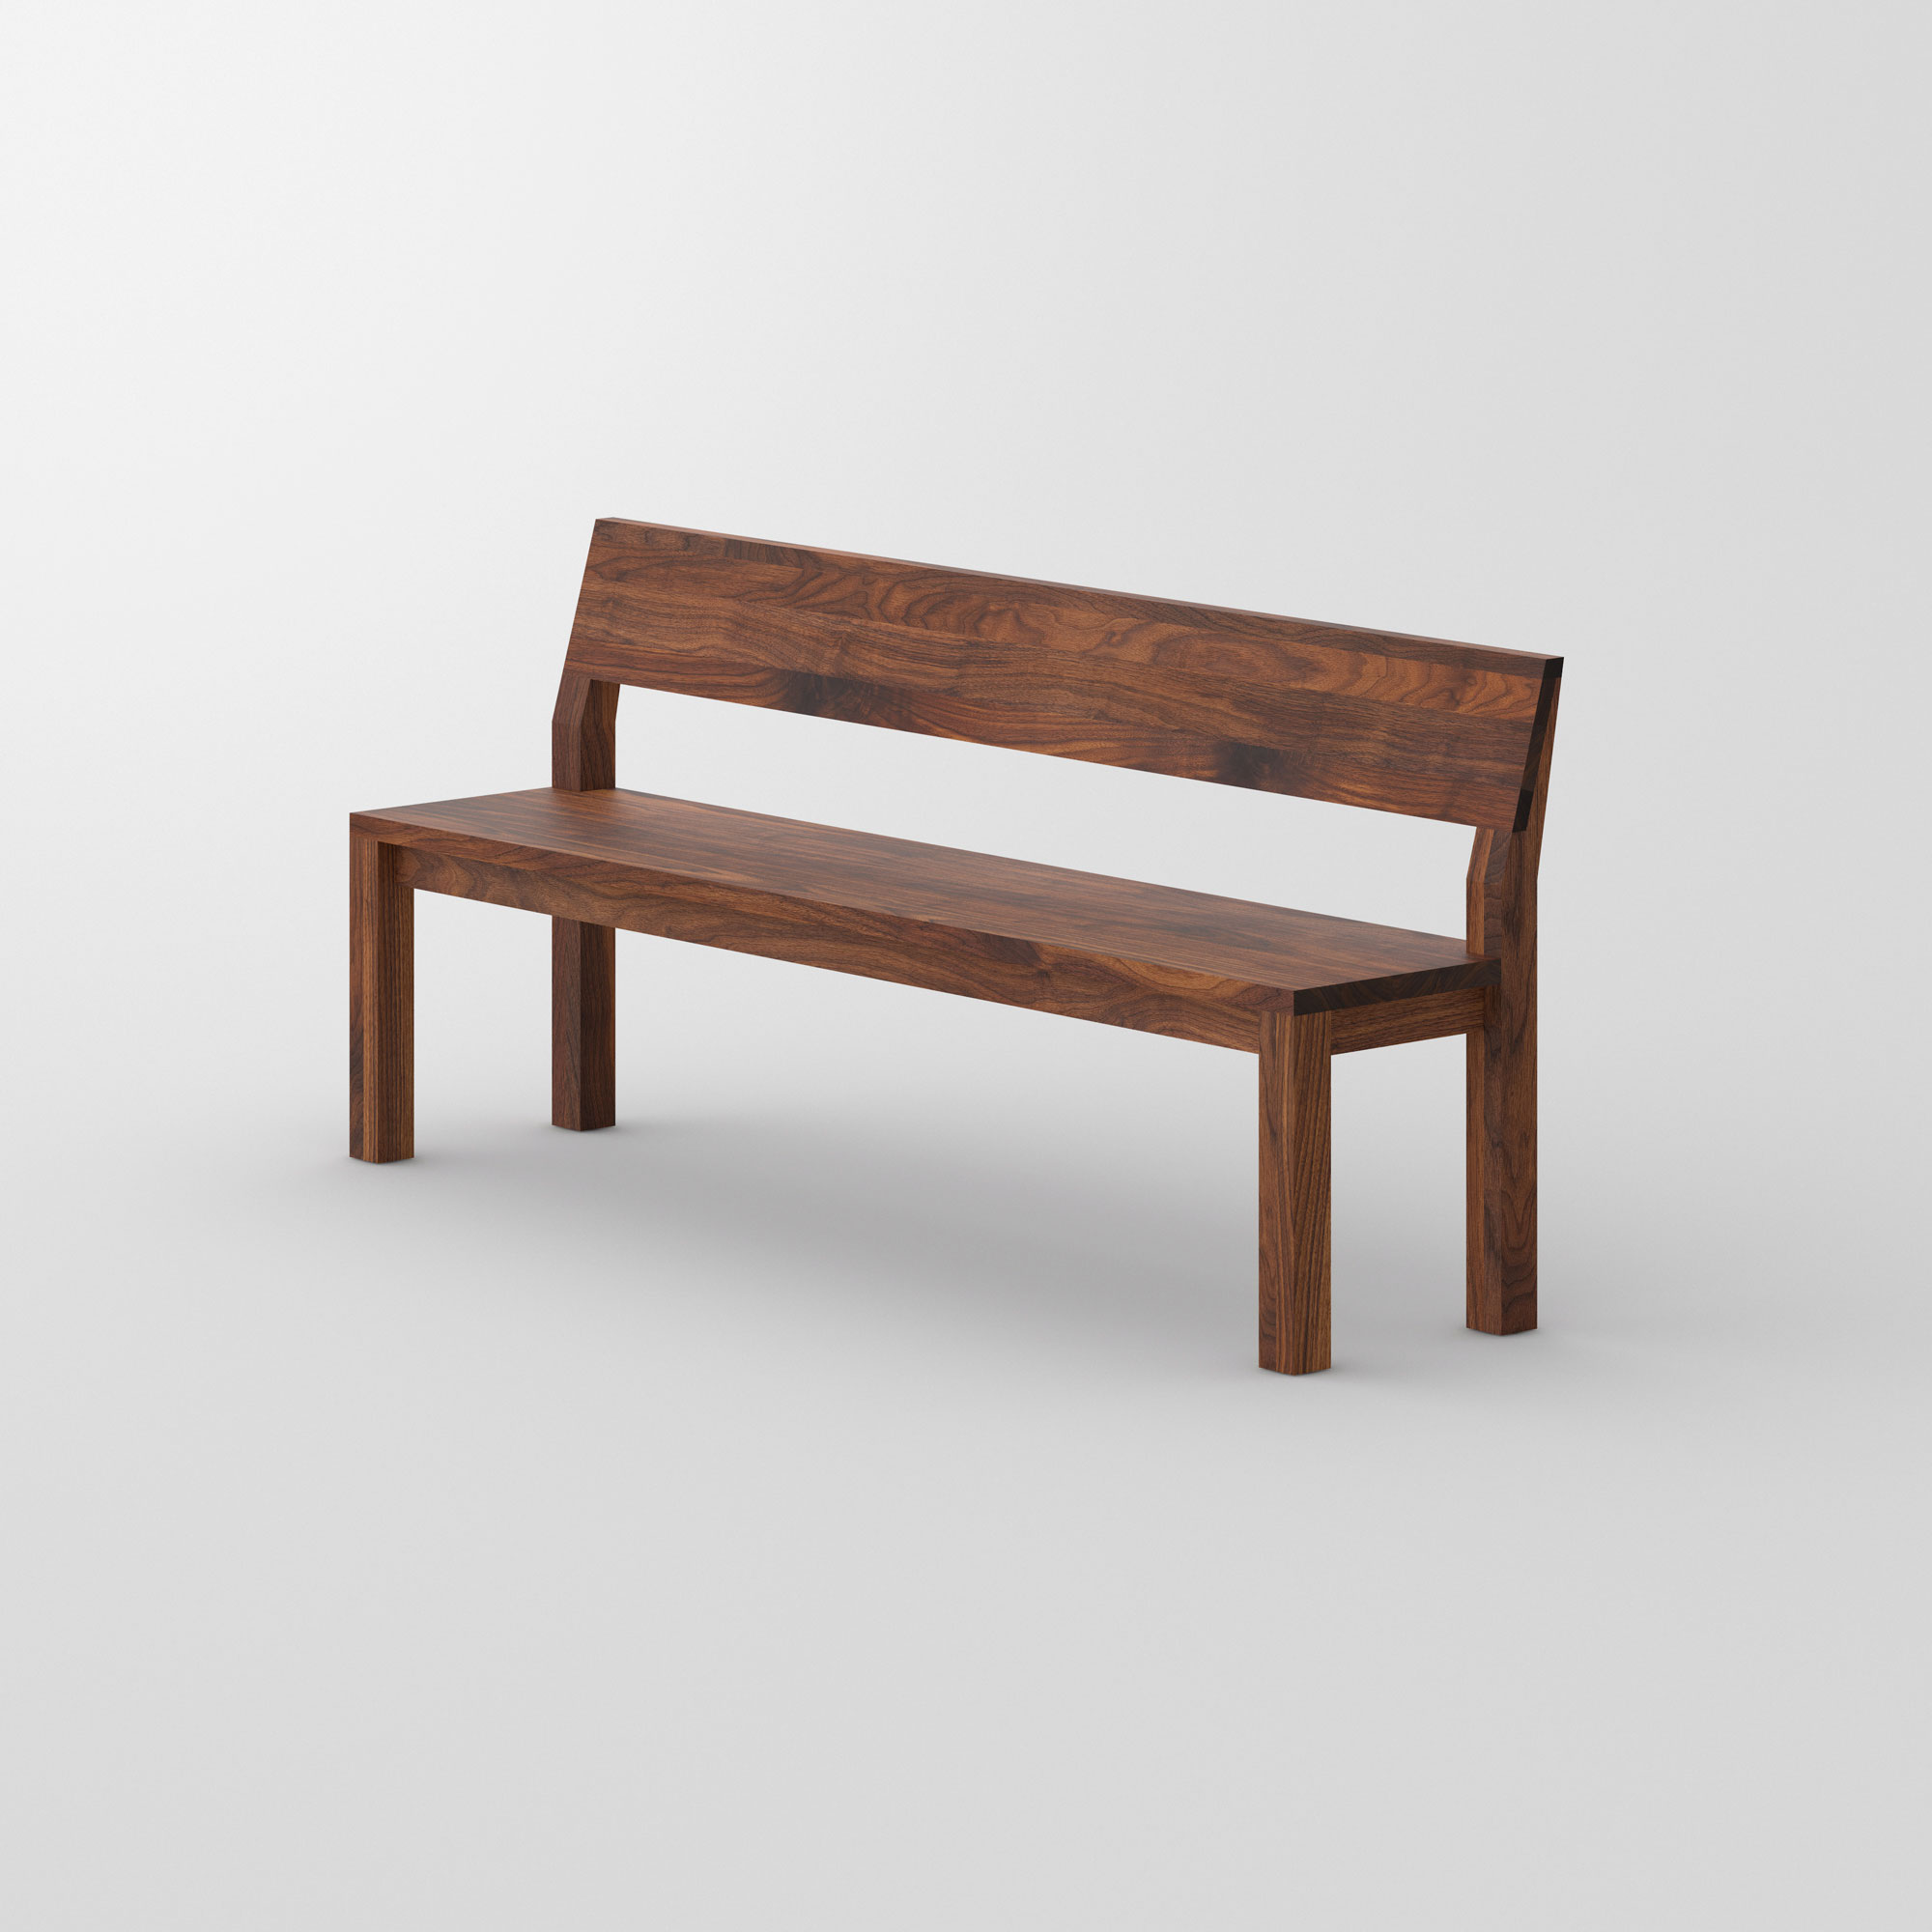 Bench with Backrest CUBUS RL cam2 custom made in solid wood by vitamin design